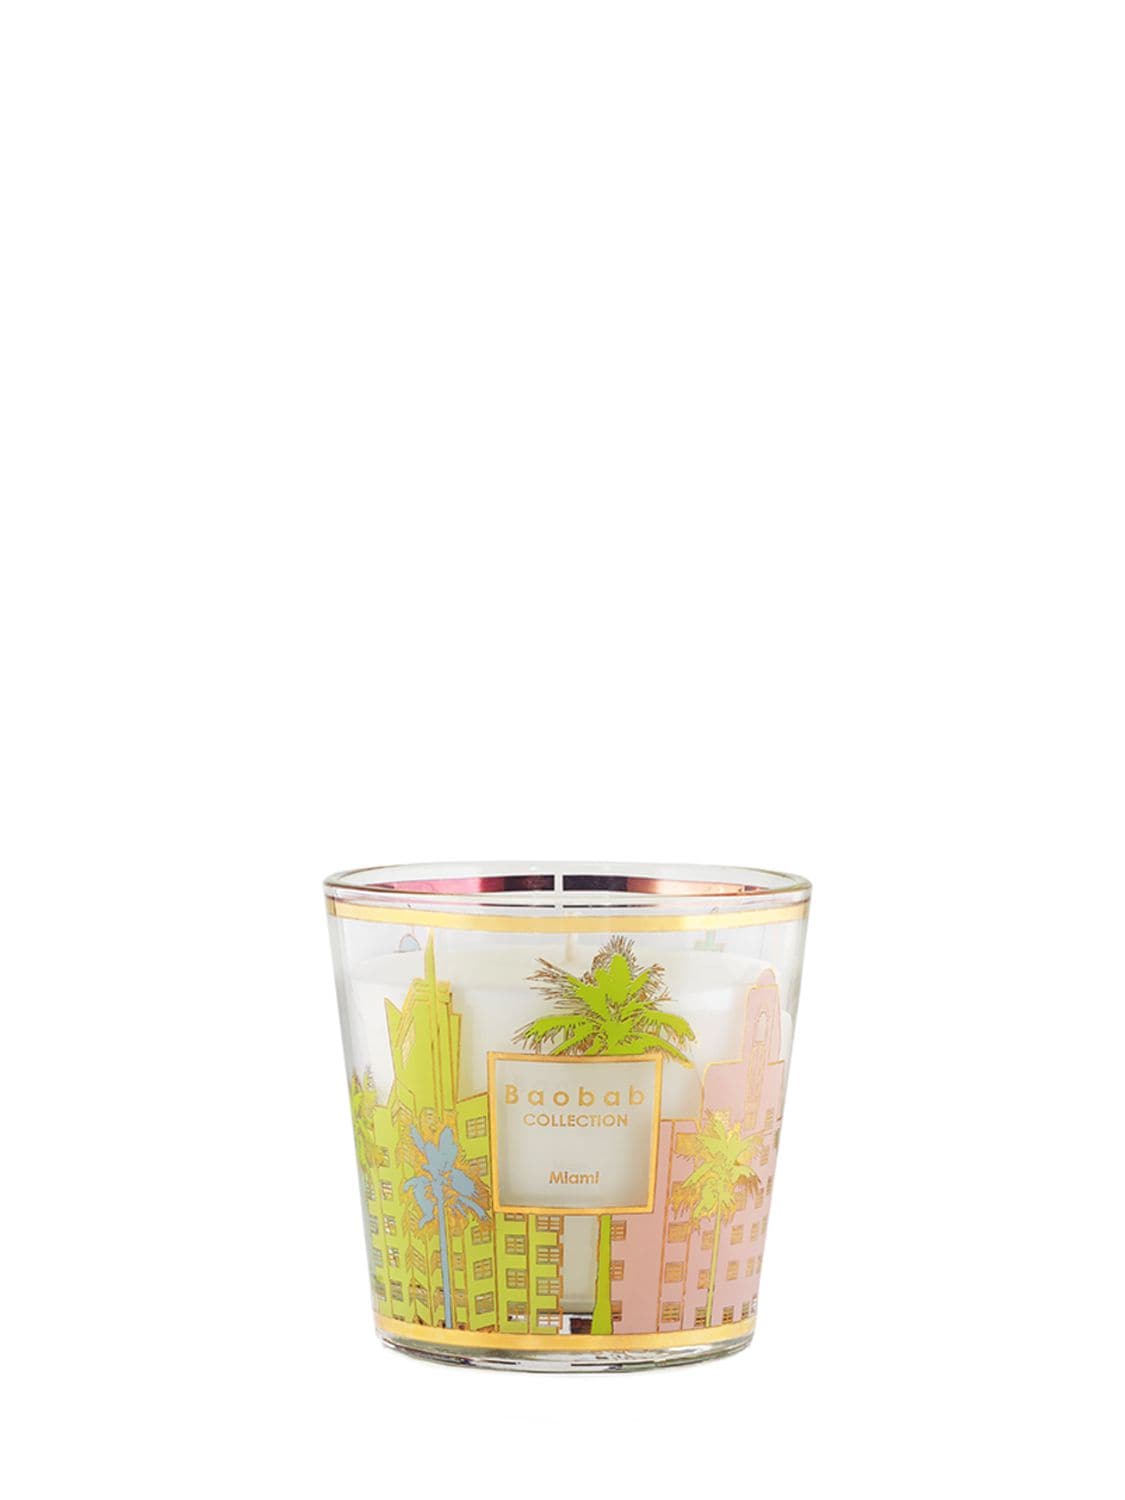 Baobab Collection Miami My First Baobab Candle In Multicolor